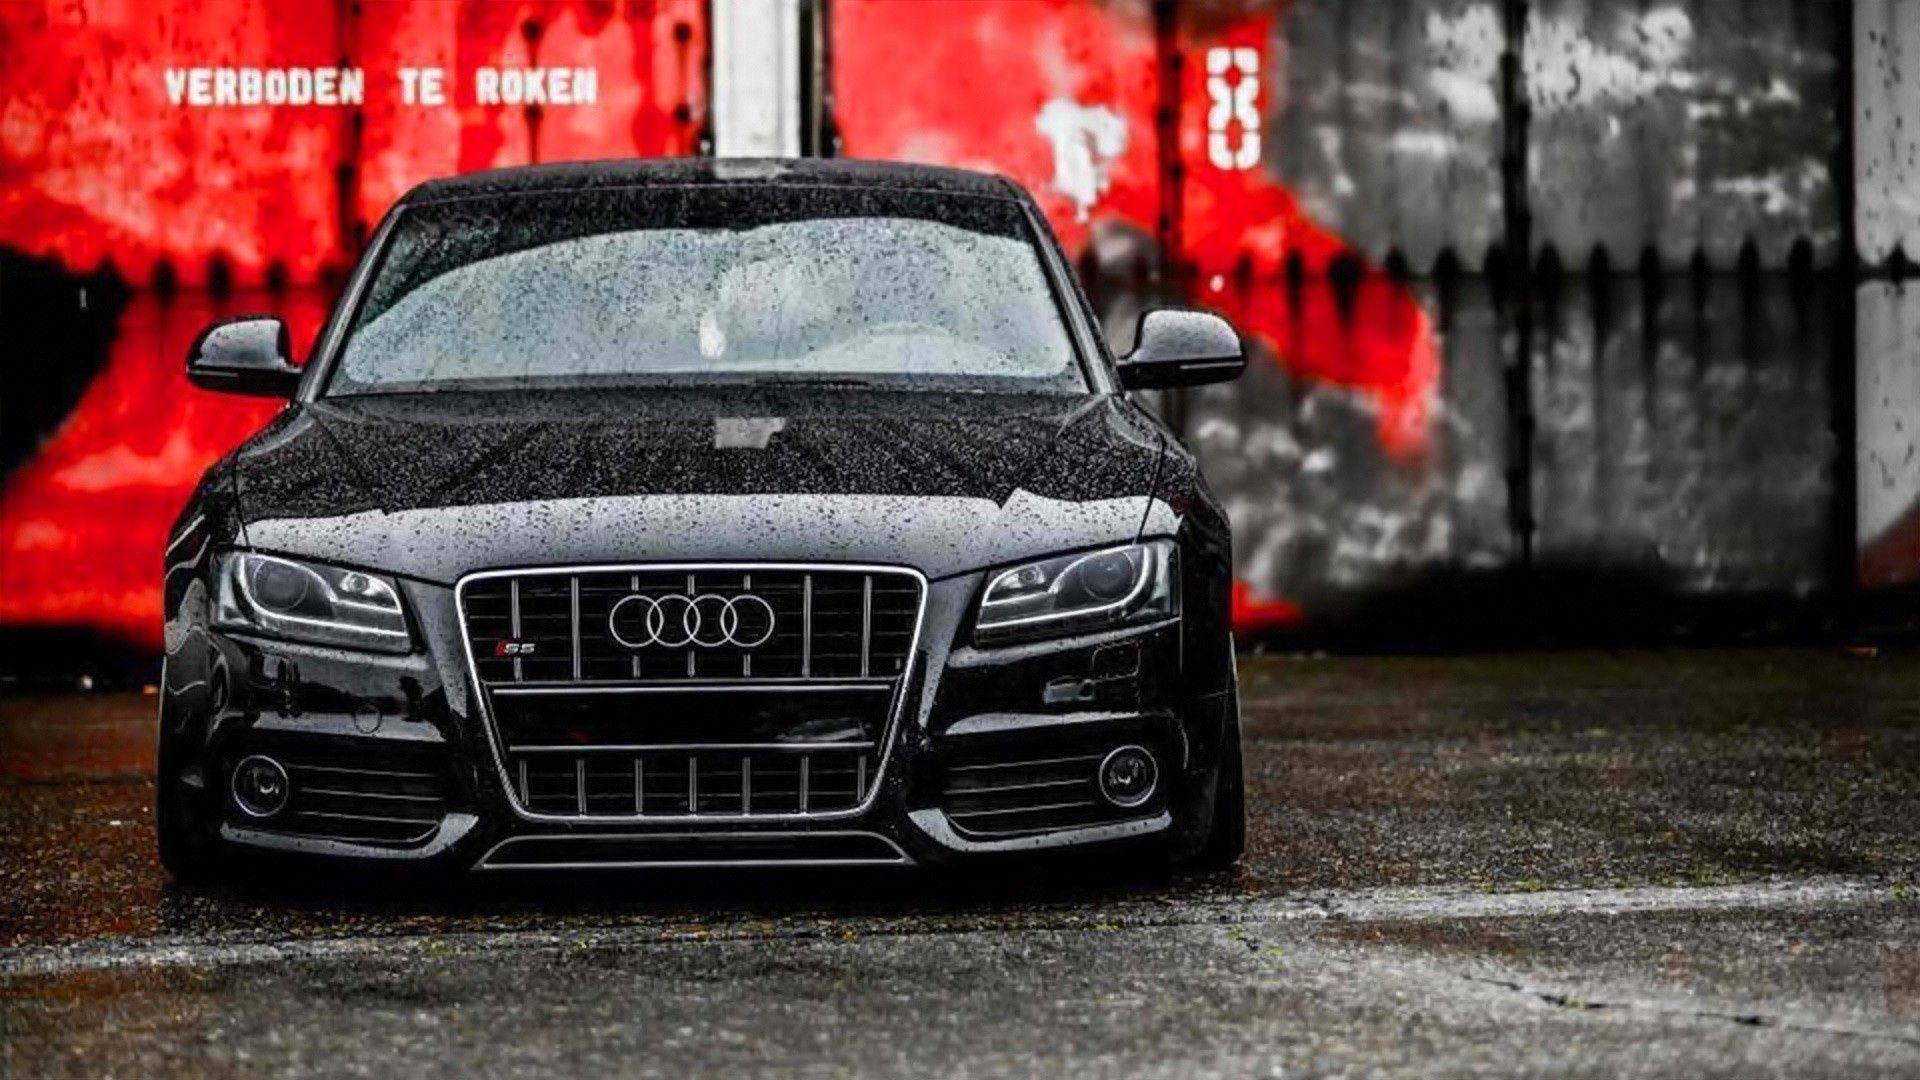 Audi Rs5 Wallpapers Top Free Audi Rs5 Backgrounds Wallpaperaccess